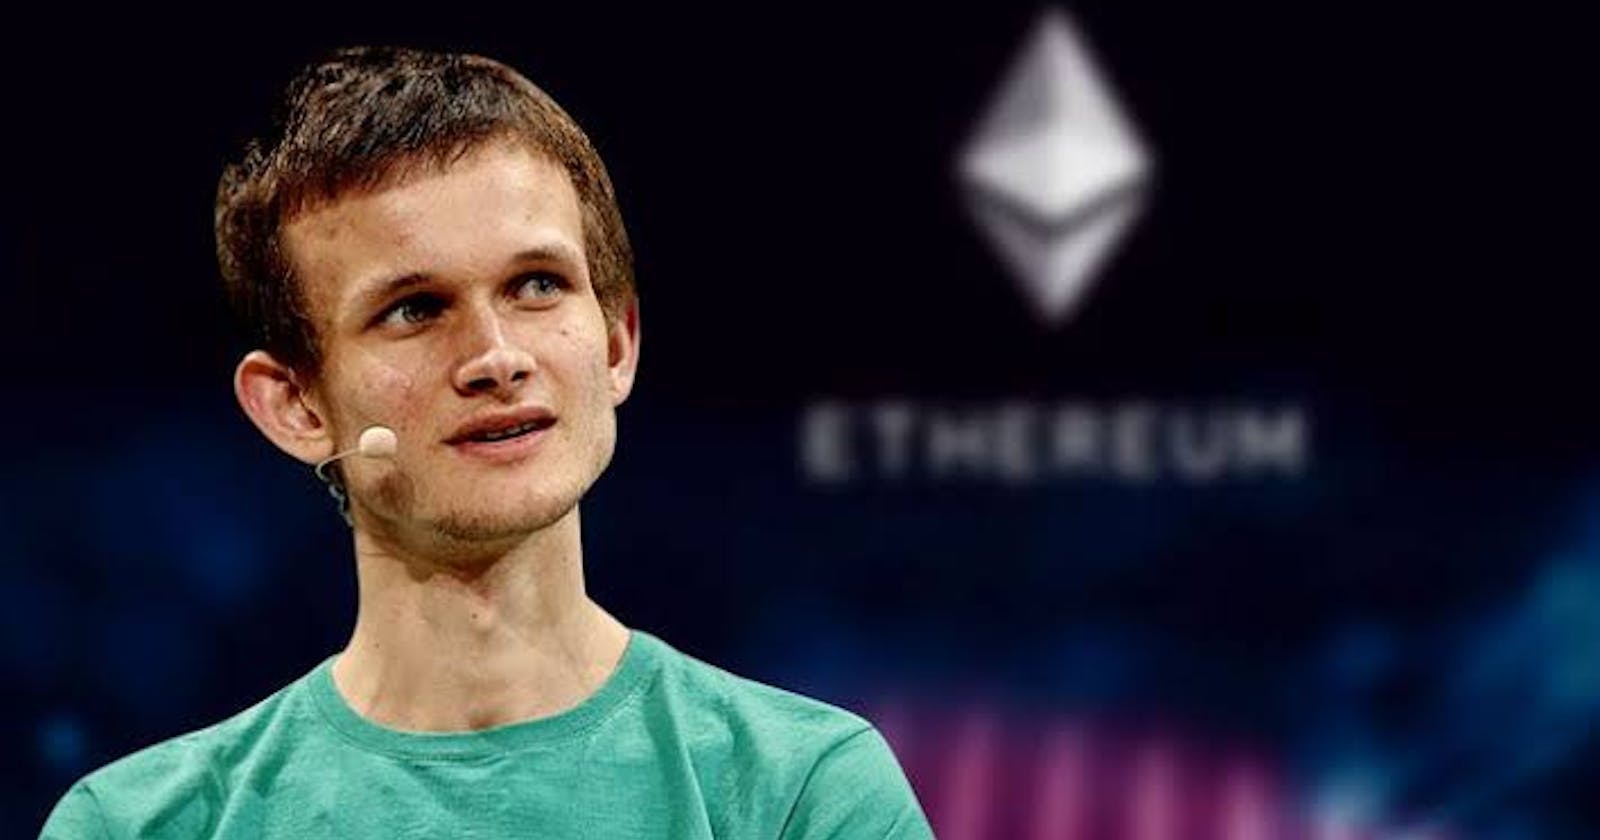 Vitalik Buterin "Ethereum Co-Founder" Says: AI Poses Serious Threat to Humanity’s Dominance